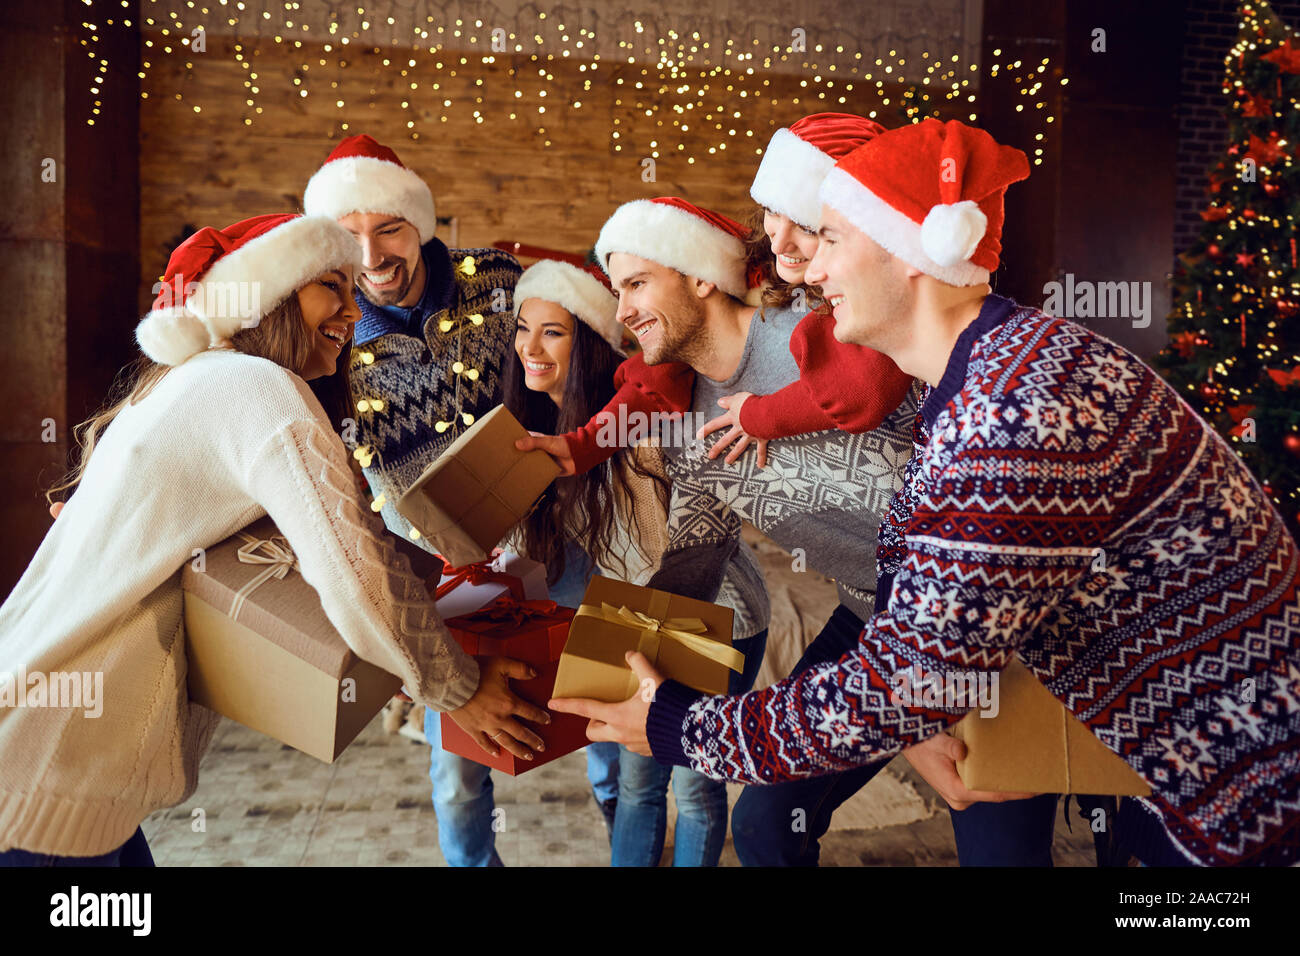 Welcome guests of friends in the house for Christmas. Stock Photo